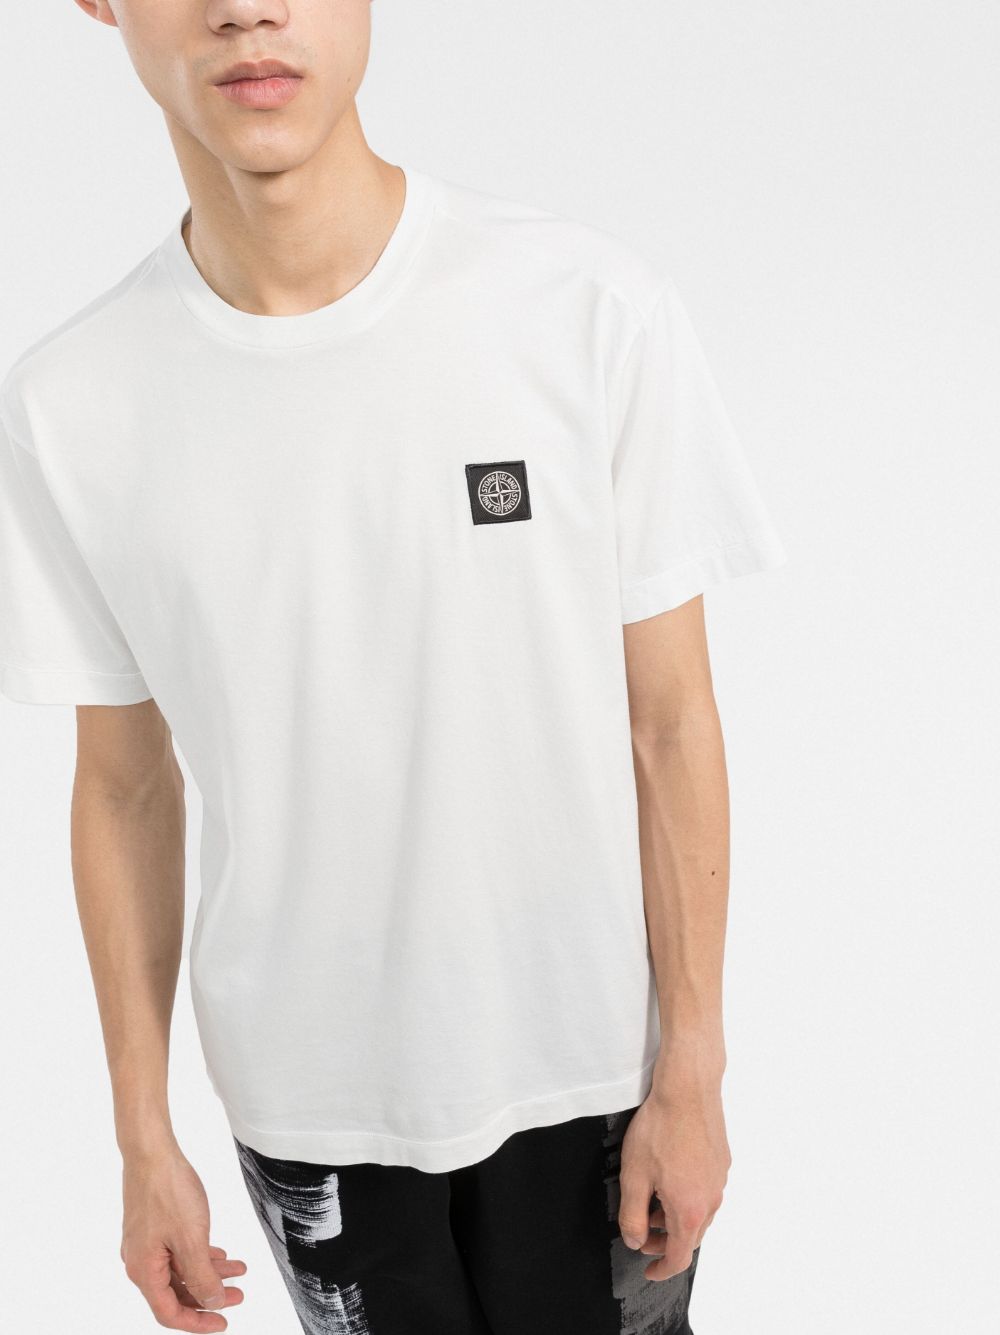 Stone Island T-shirt 24113 60/2 COTTON JERSEY GARMENT DYED Blanc - Lothaire boutiques